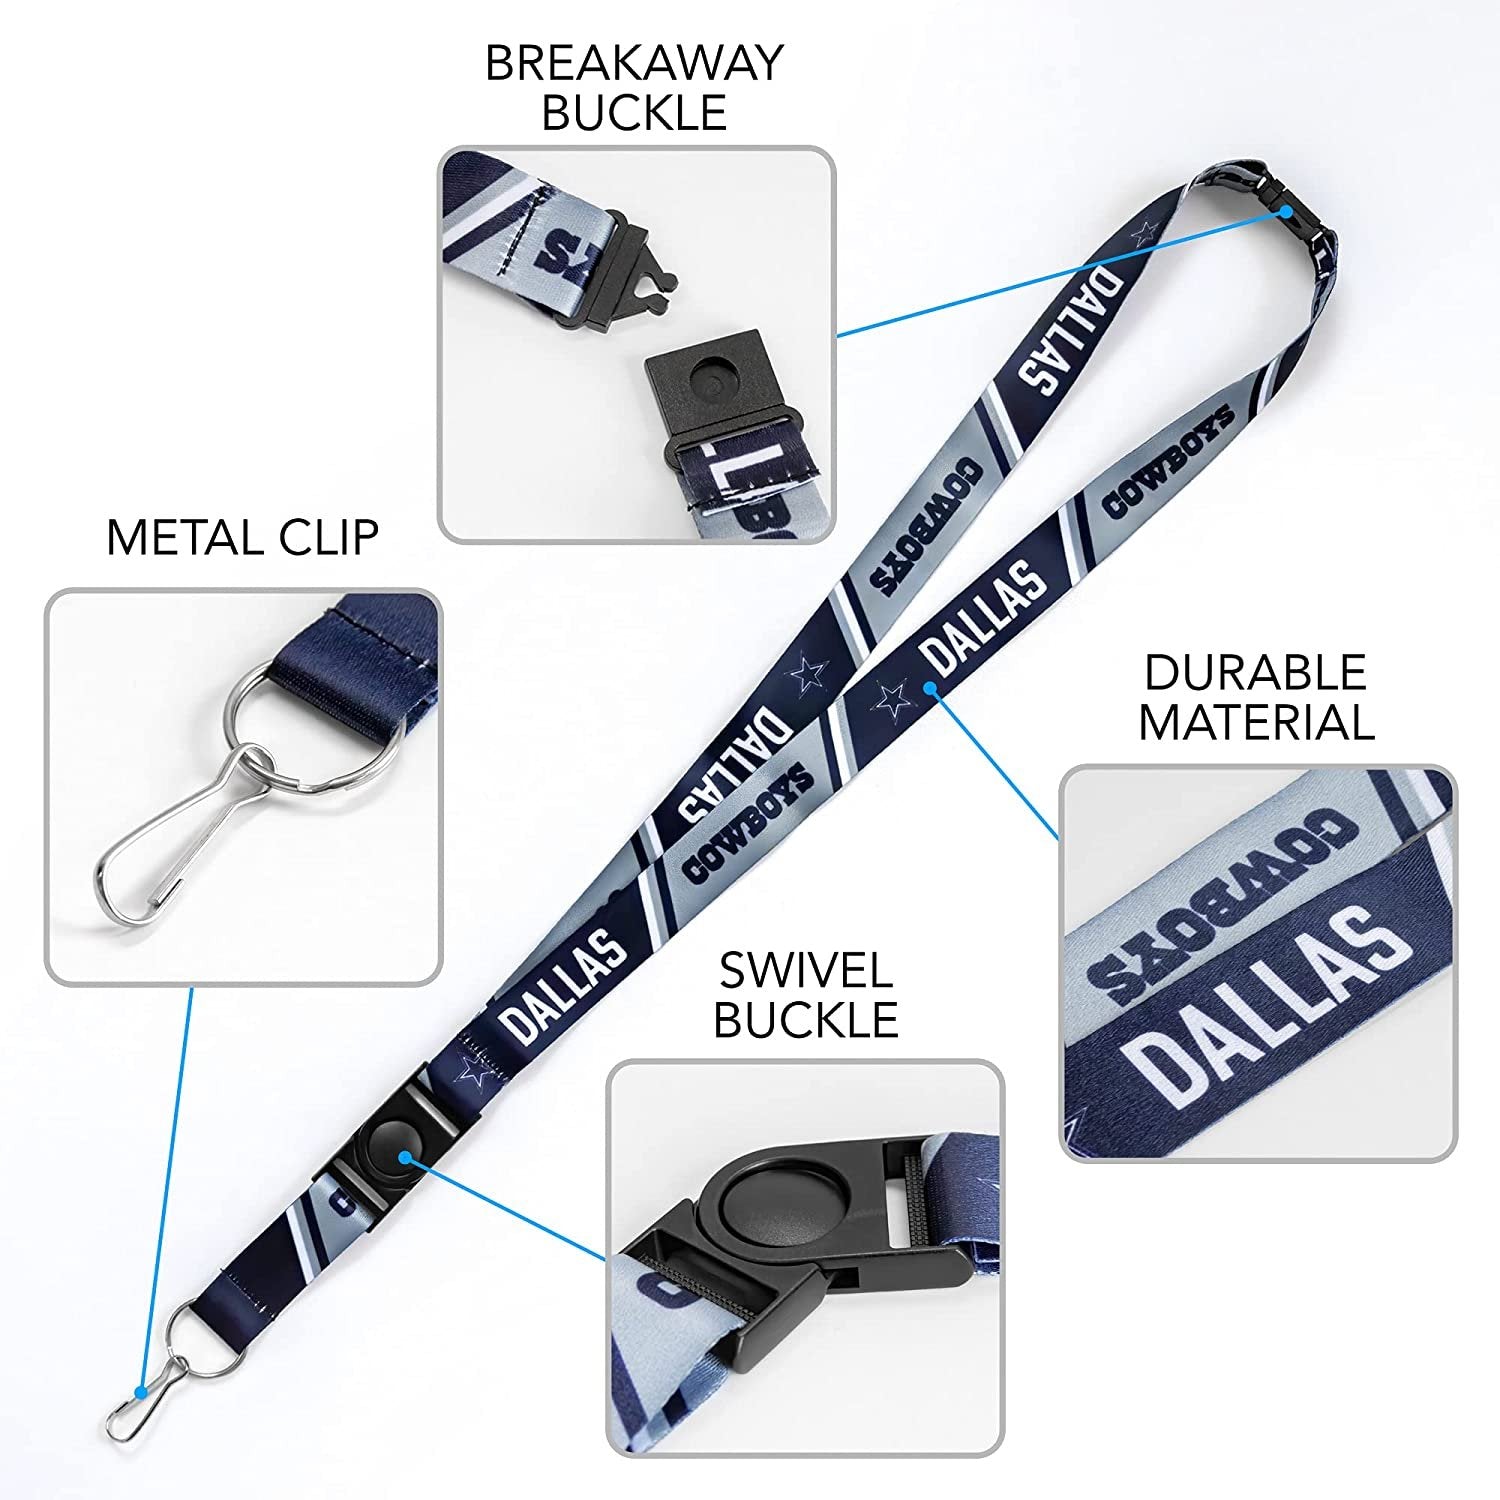 University of Virginia Cavaliers Lanyard Keychain Double Sided 18 Inch Button Clip Safety Breakaway